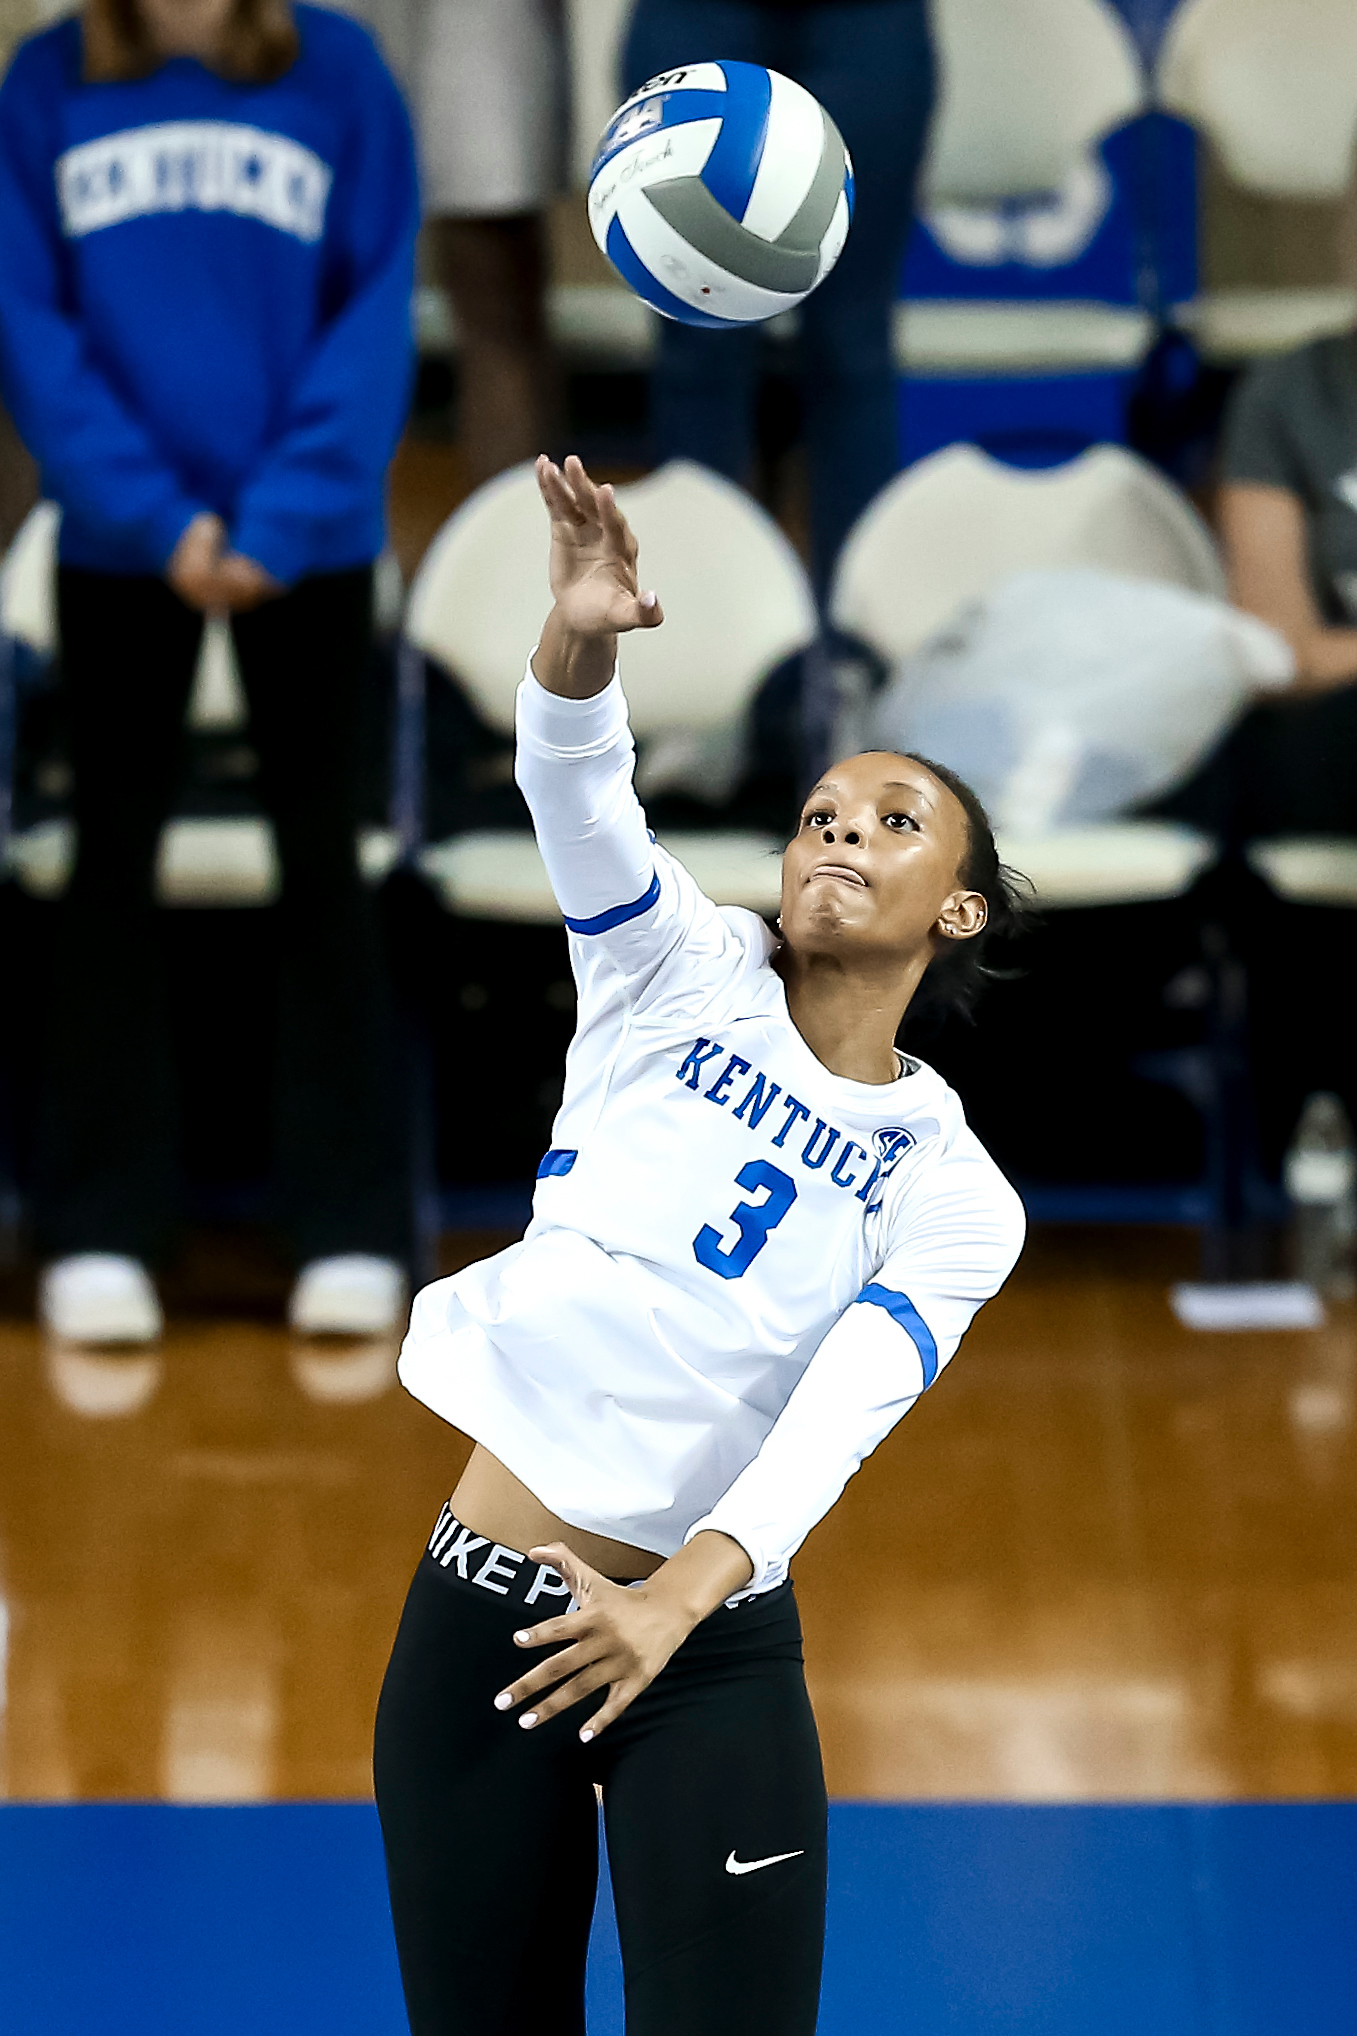 UK volleyball player Jordyn Williams playing in a game during the 2022 season.